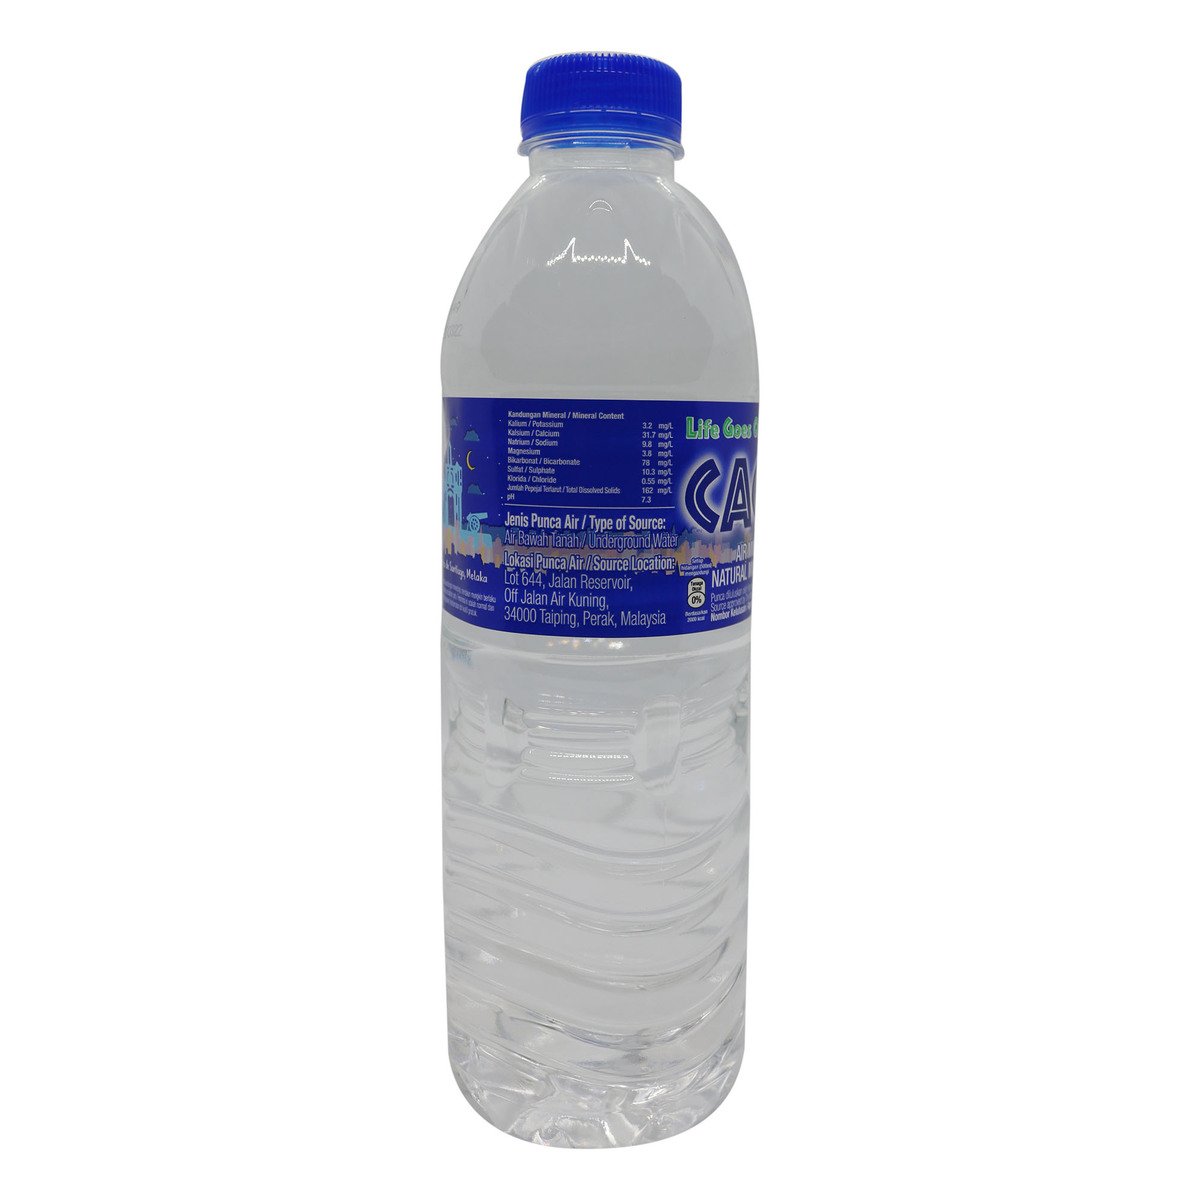 Cactus Mineral Water 500ml